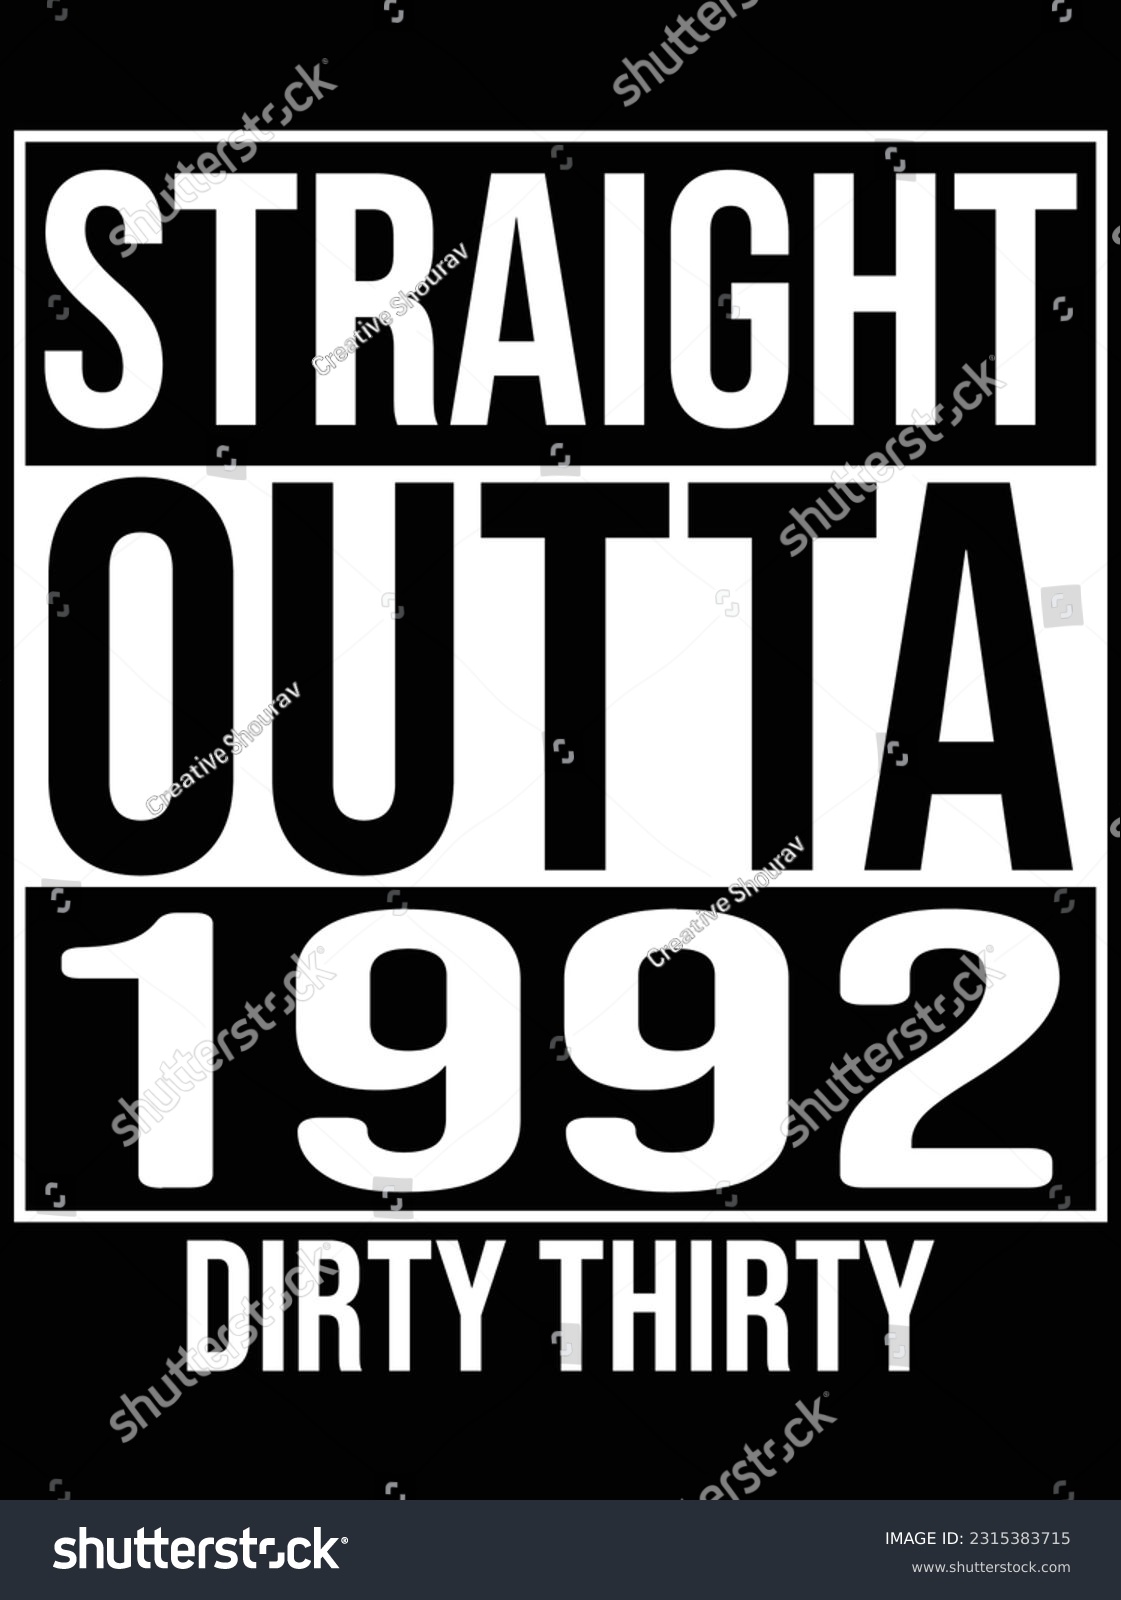 SVG of Straight outta 1992 dirty thirty vector art design, eps file. design file for t-shirt. SVG, EPS cuttable design file svg